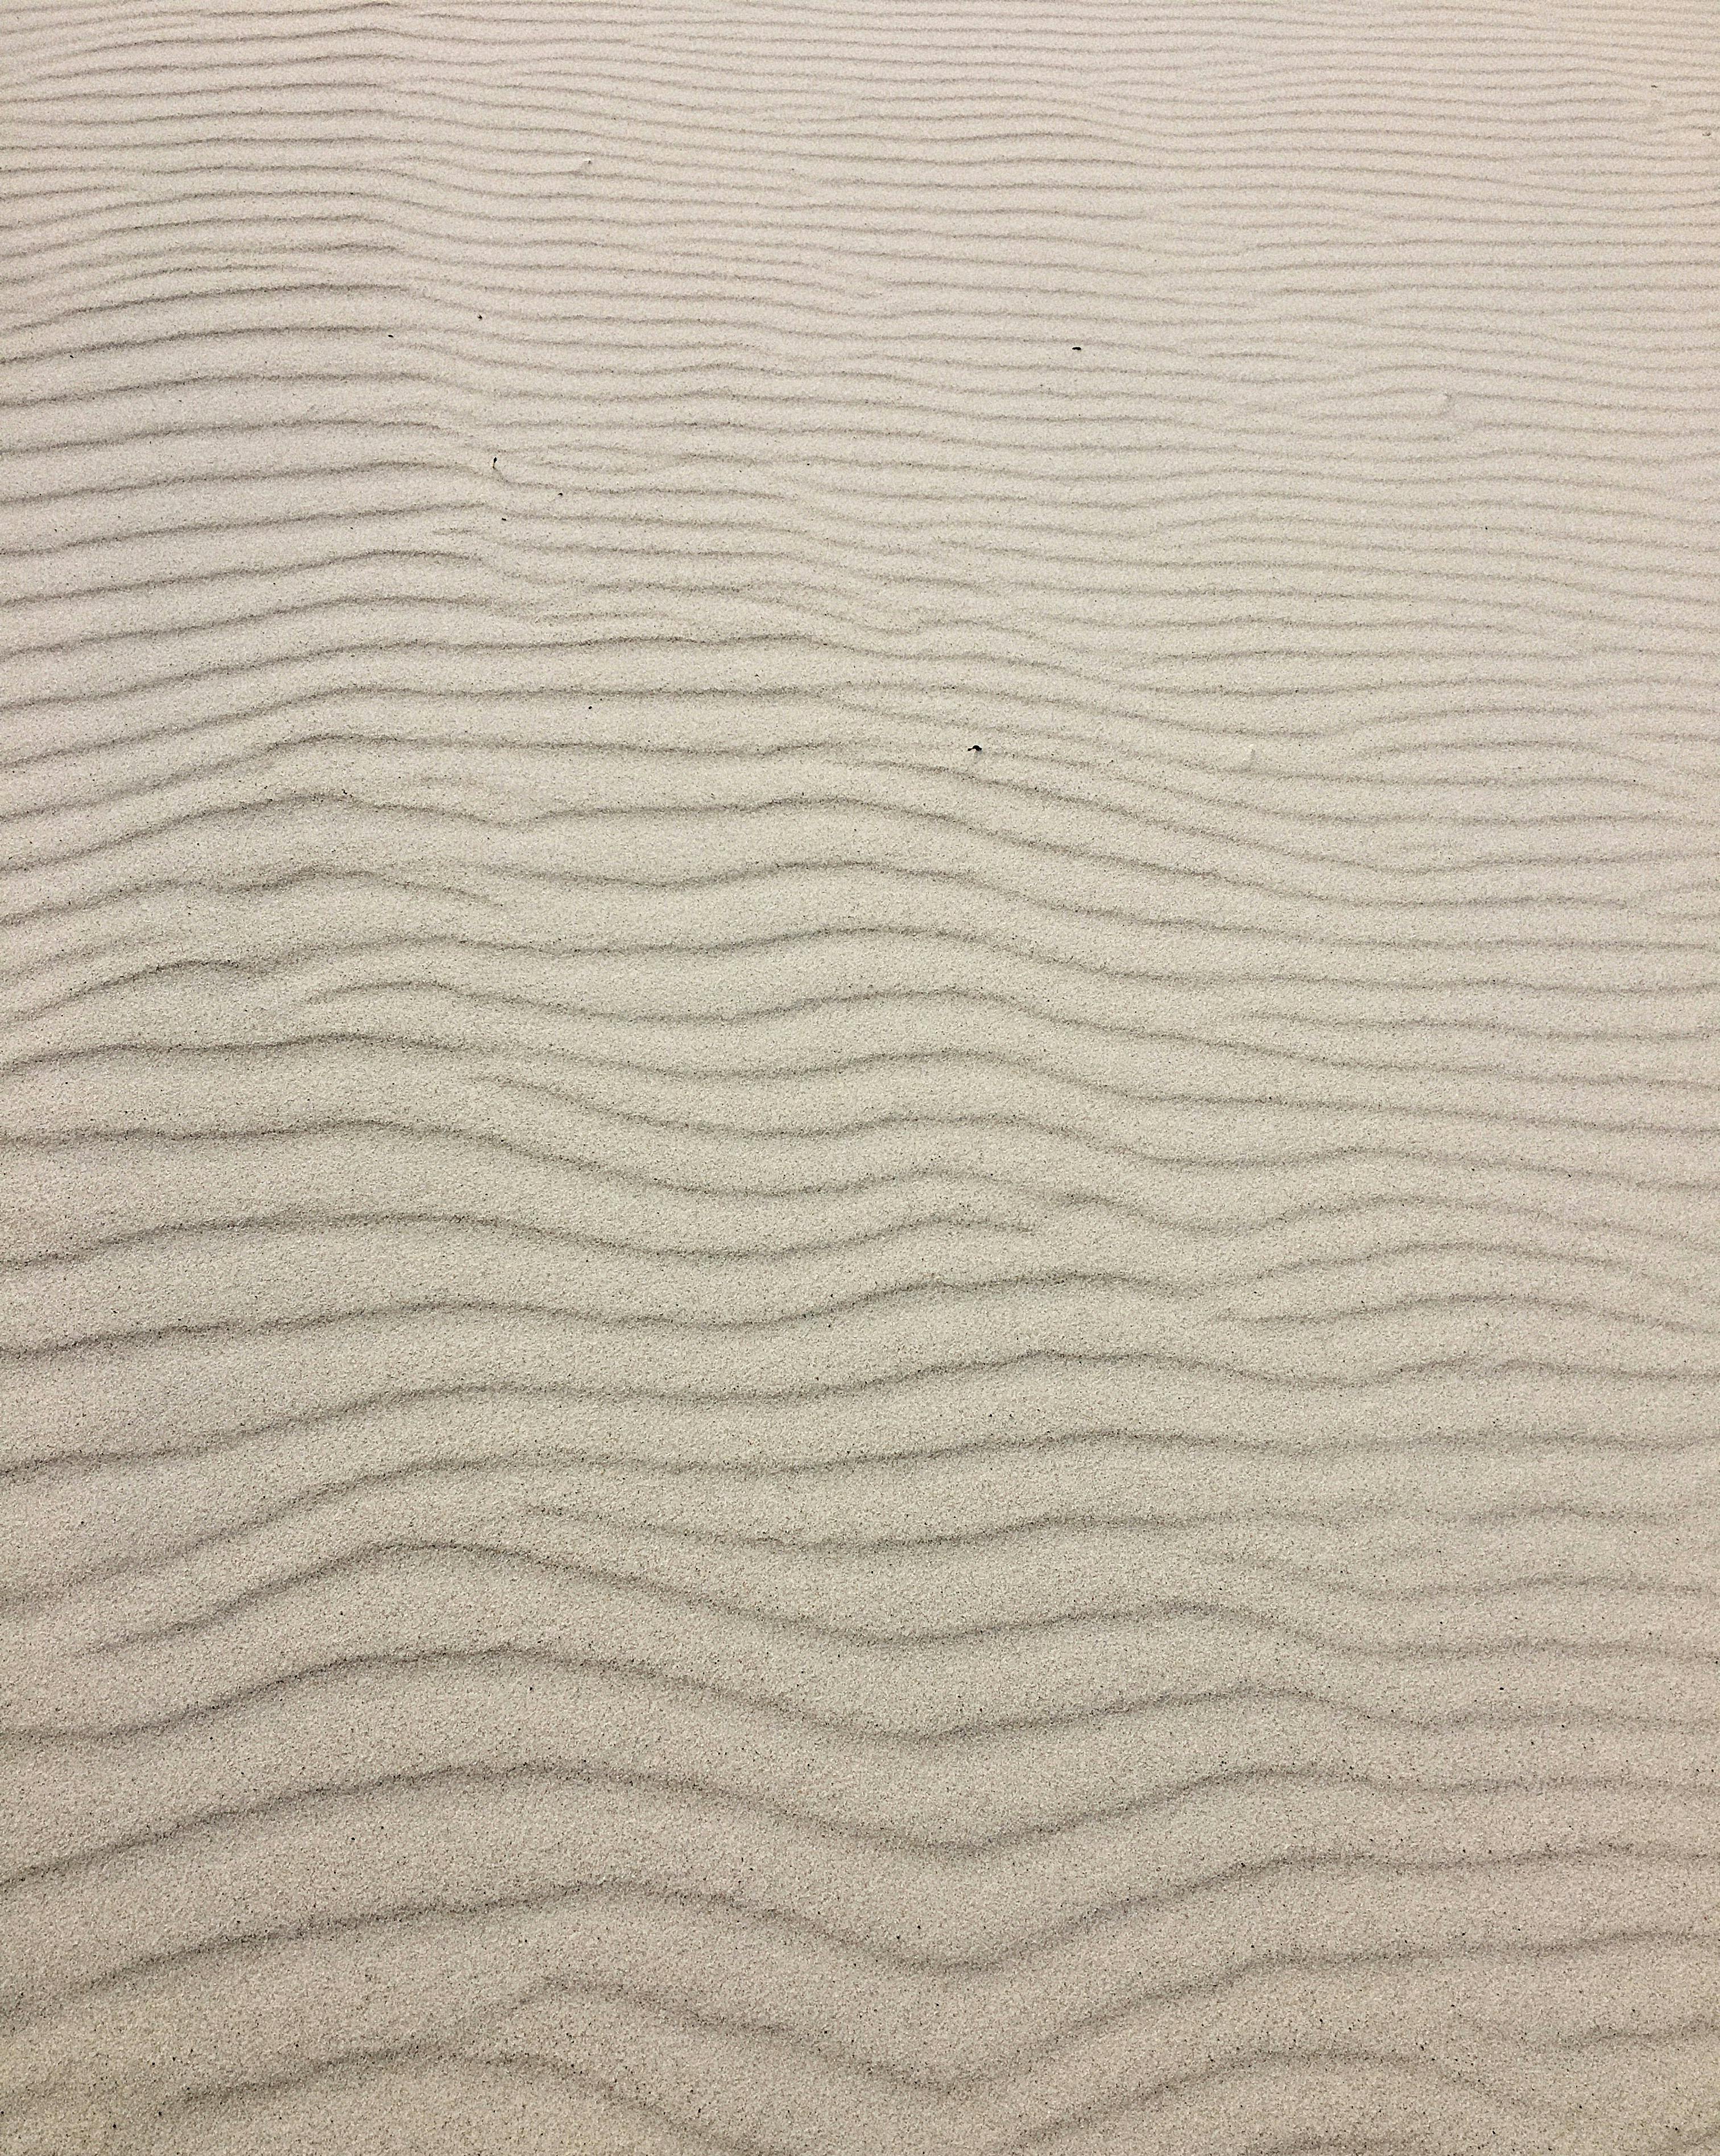 ripples in brown sand